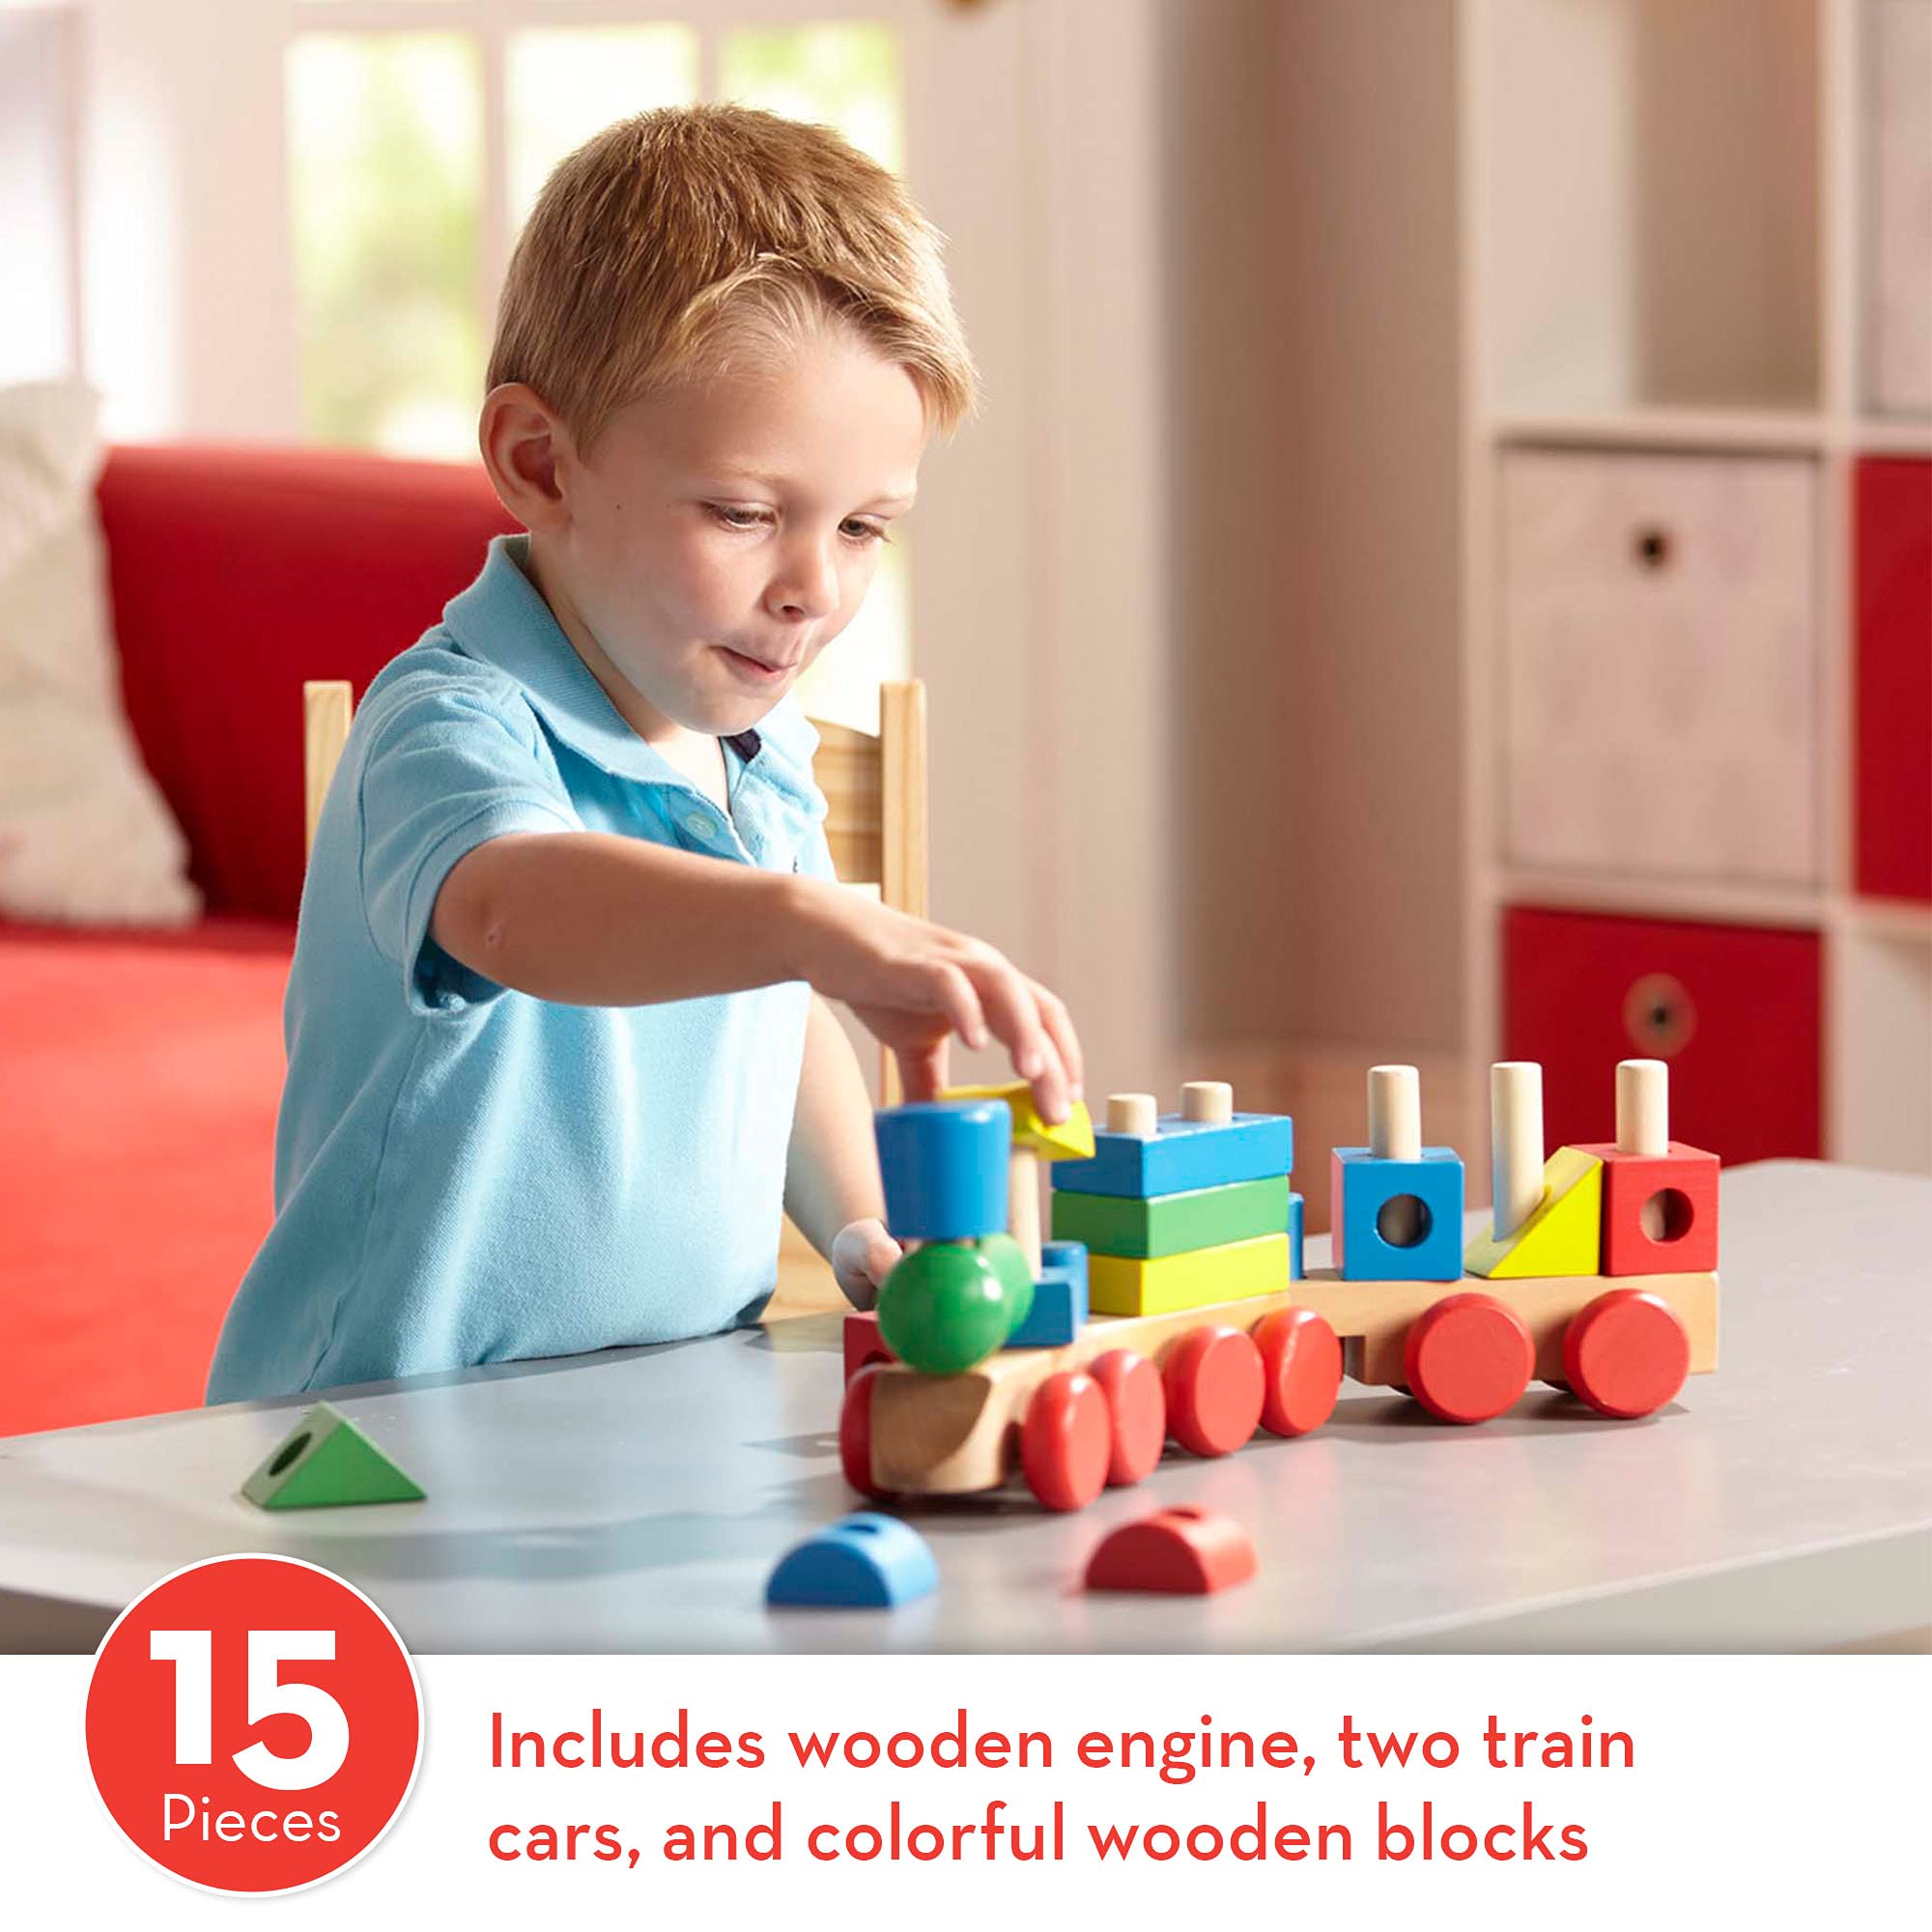 Melissa & Doug Stacking Train - Classic Wooden Toddler Toy (18 pcs) - Wooden Train Set, Wooden Sorting & Stacking Toys For Toddlers Ages 2+